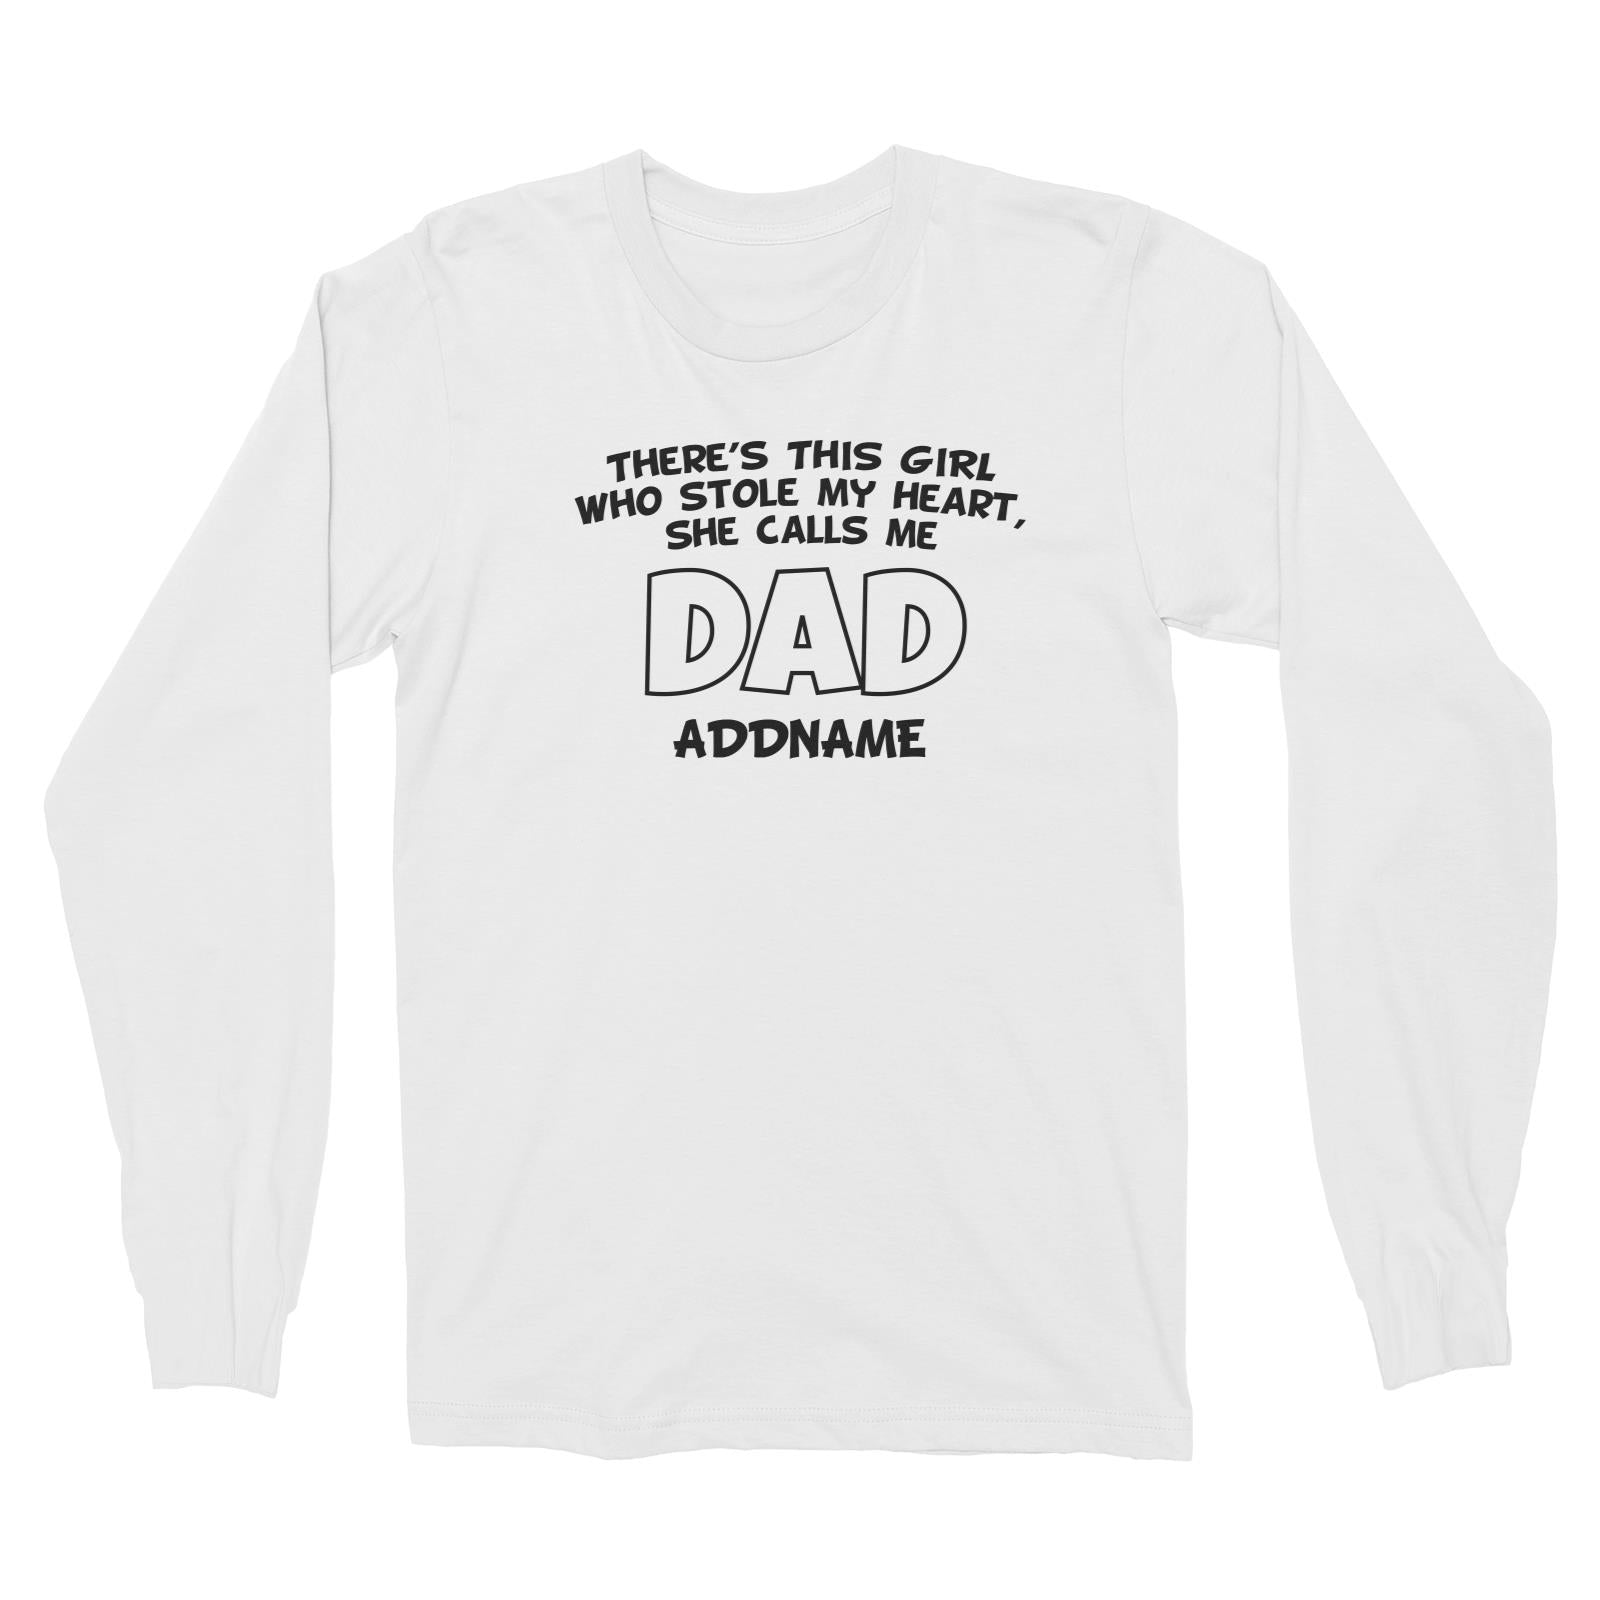 Theres This Girl Who Stole My Heart She Calls Me Dad Long Sleeve Unisex T-Shirt